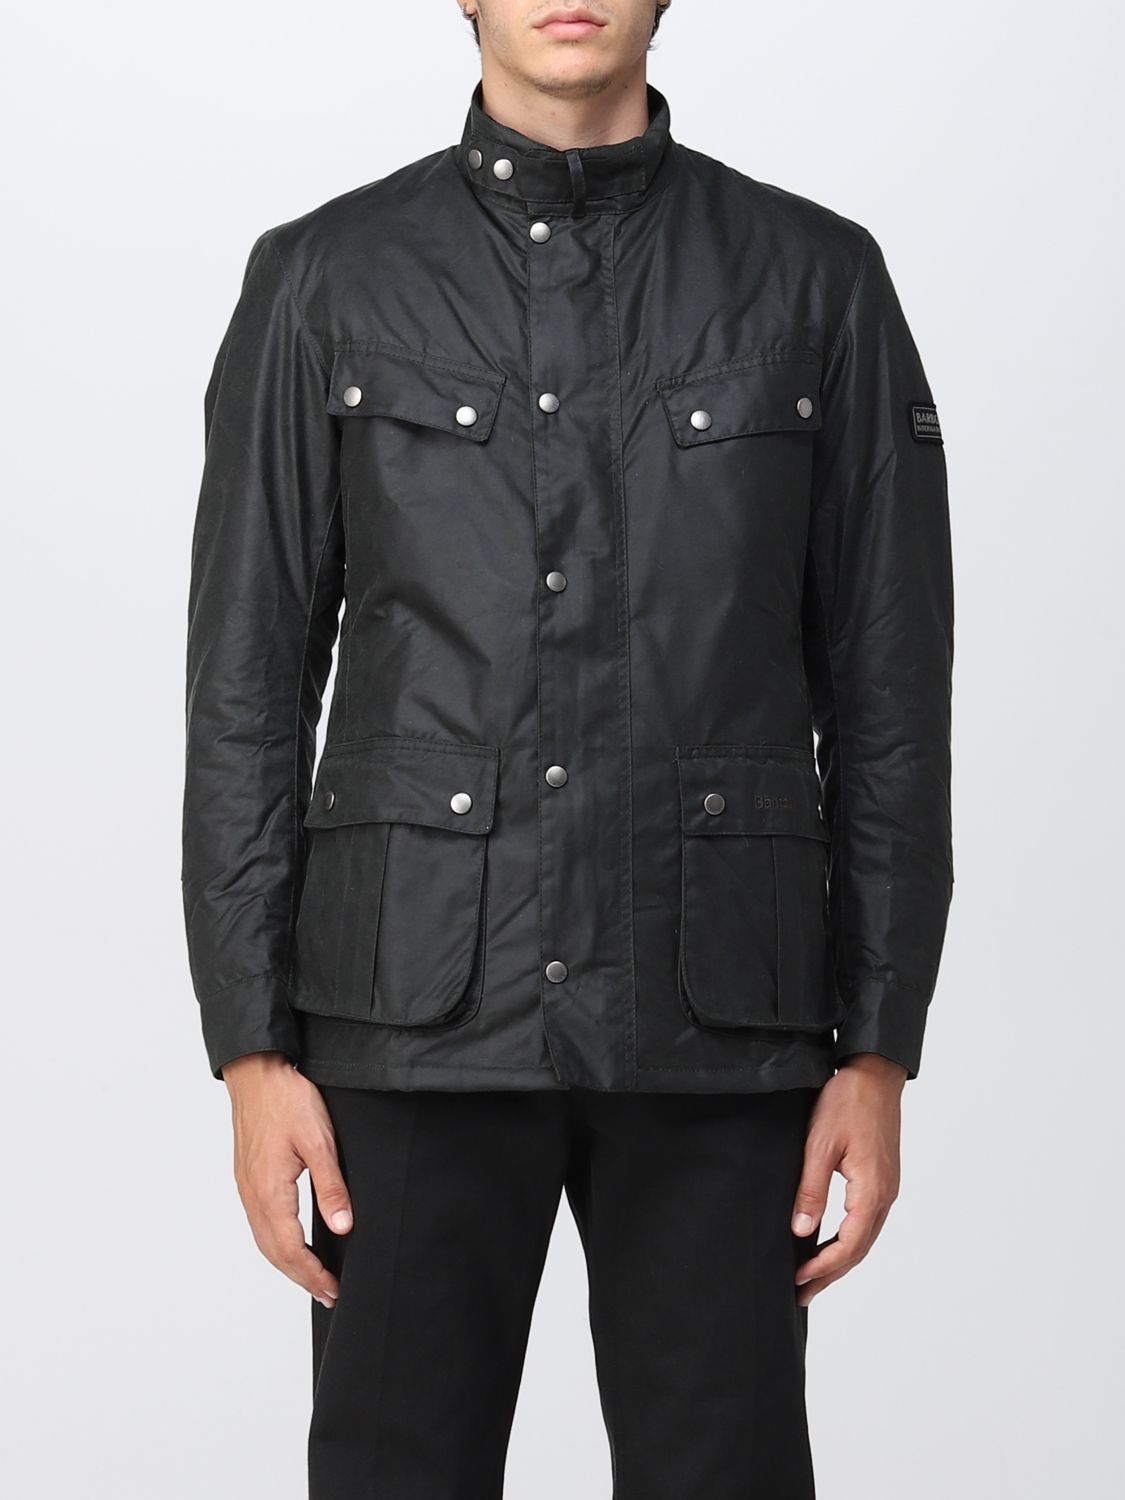 BARBOUR: jacket for man - Military | Barbour jacket MWX0337 online on ...